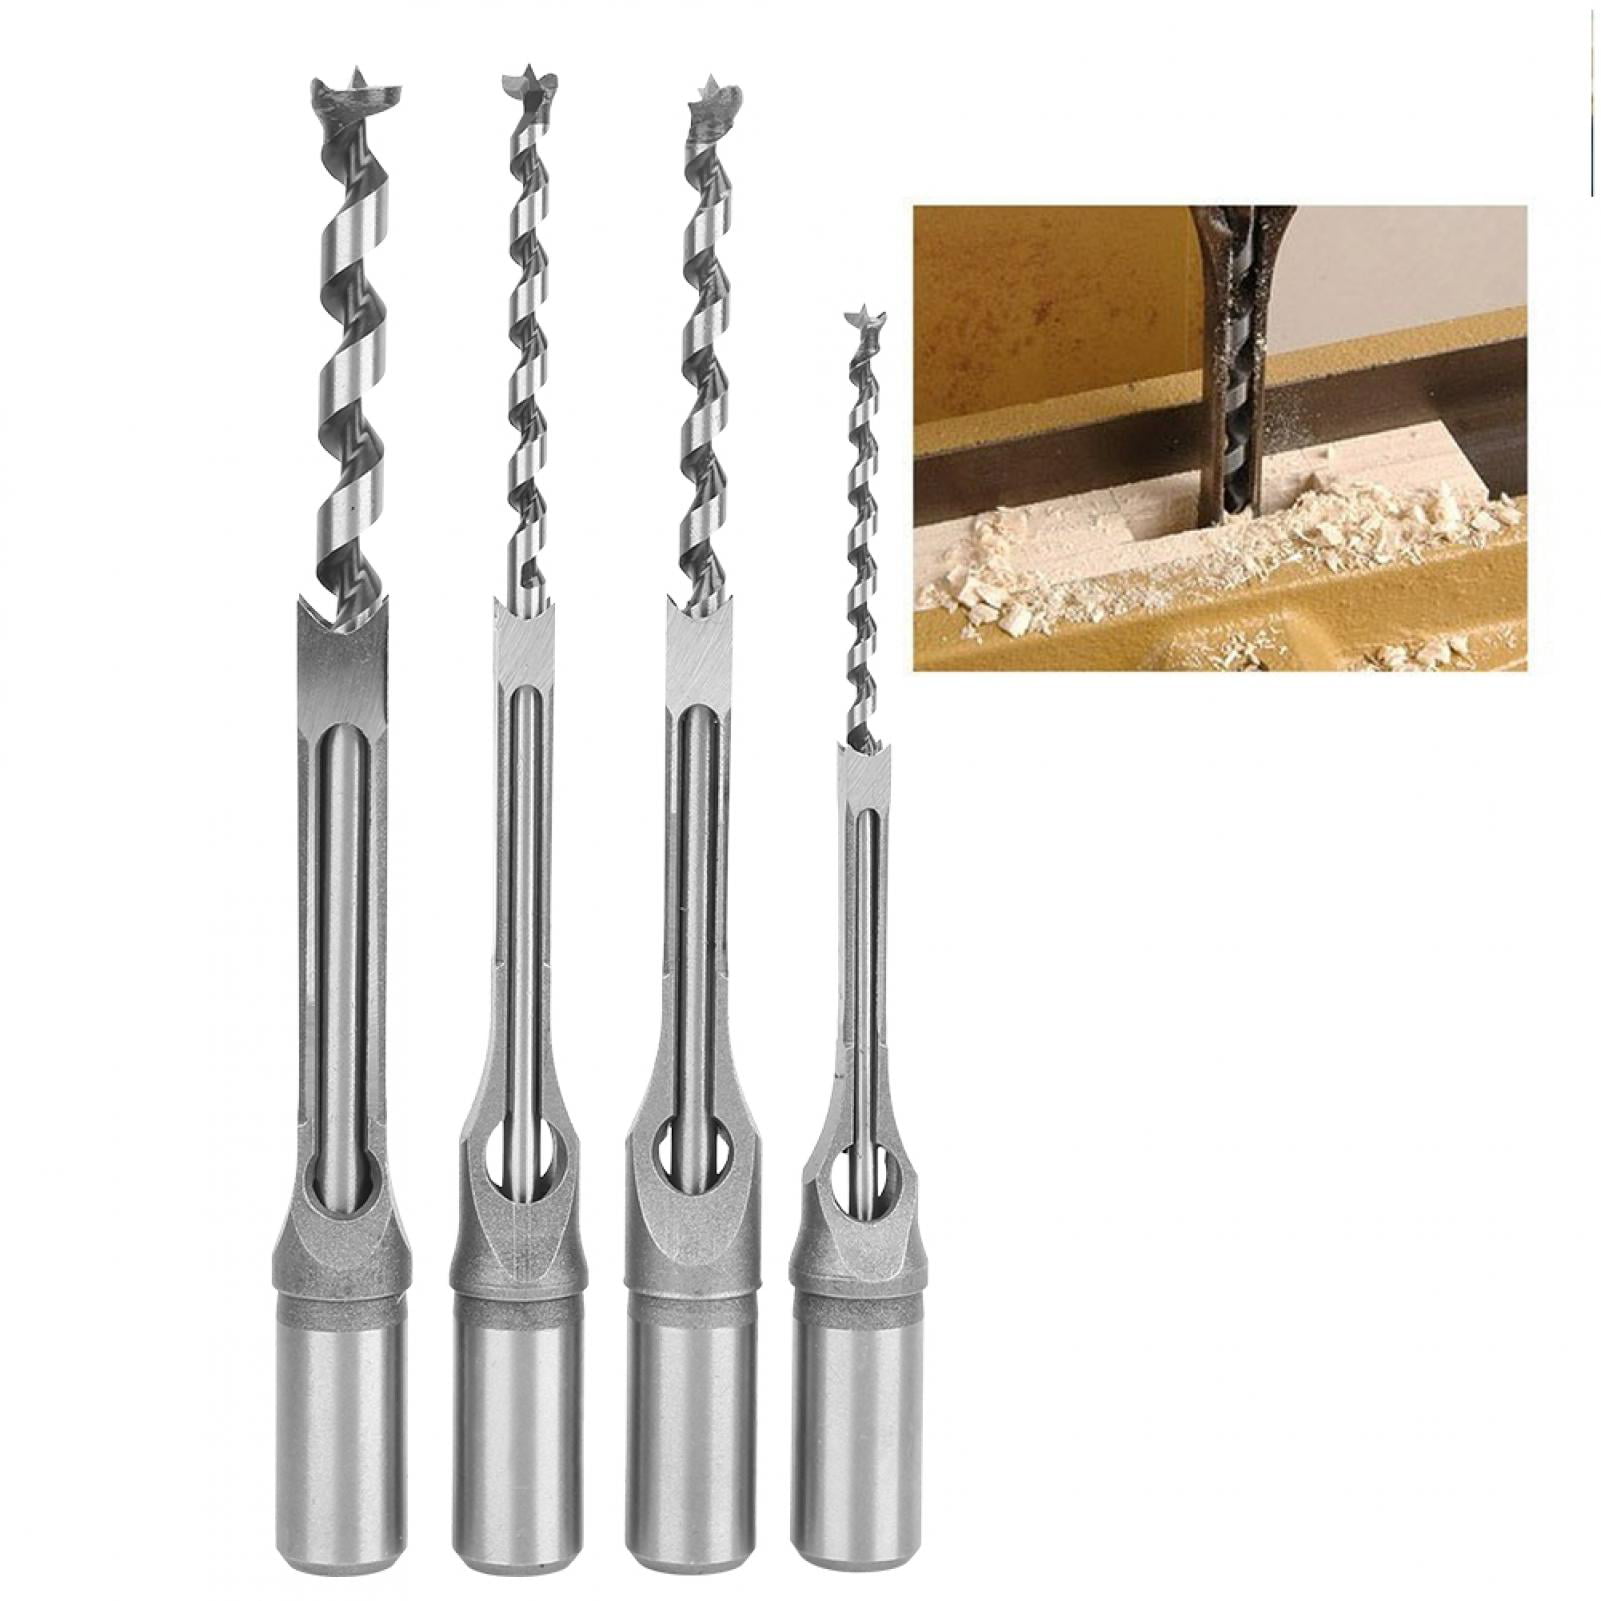 Drill Bit Hole Drill 6‑9.5mm Drill Bits Woodworking Drill Tool Square Hole Drill Bits for Density Board Wood and Other Wood Products Medium Fiber Board 